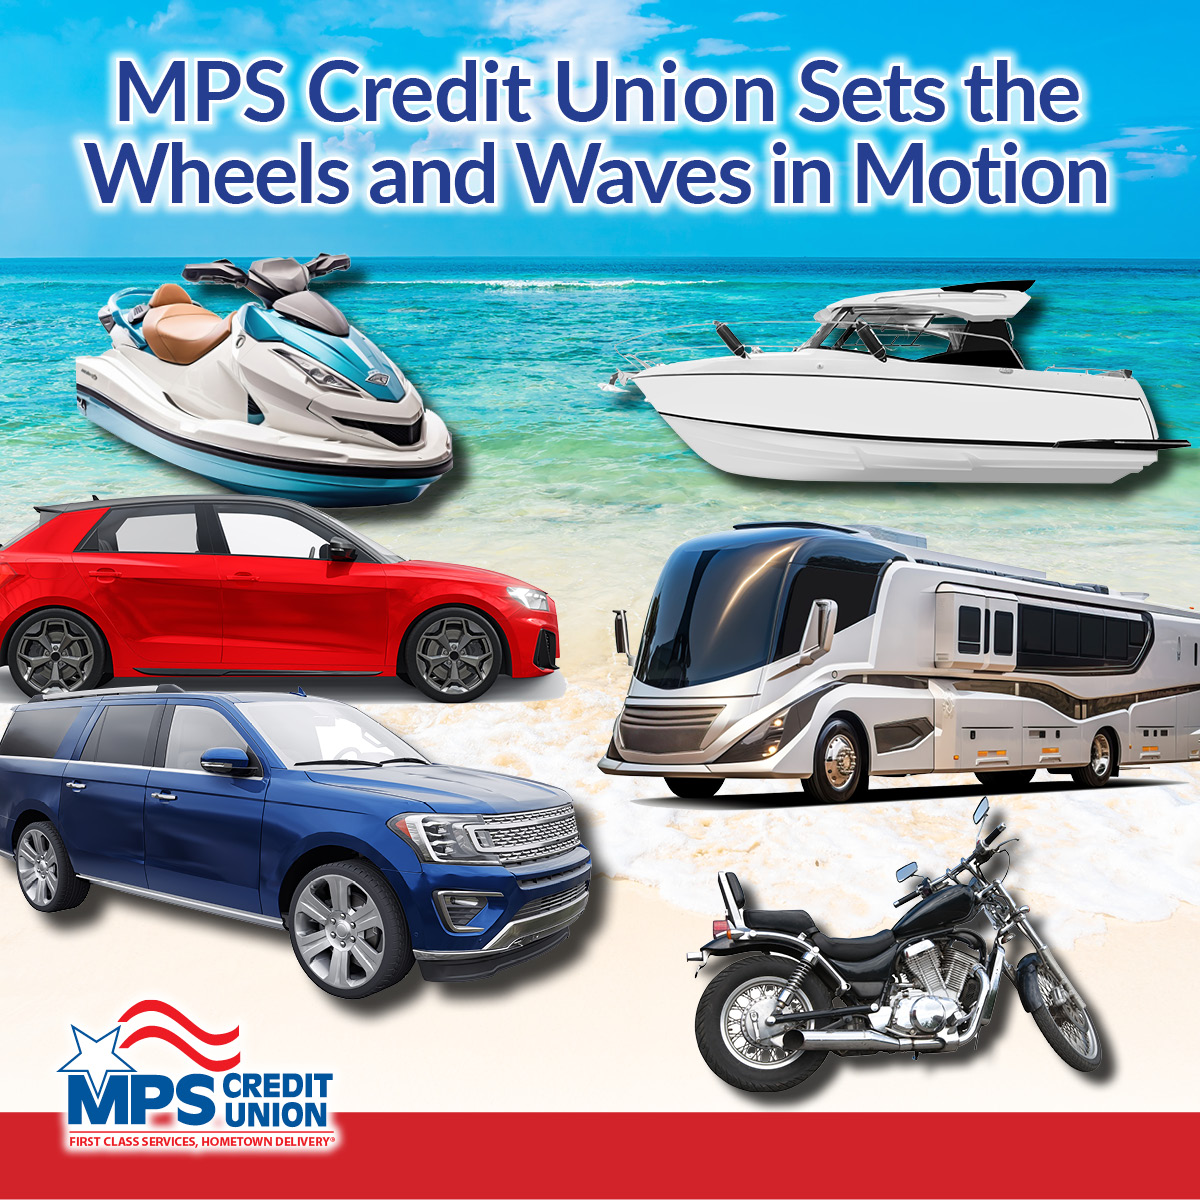 MPS Credit Uiom we offer New & Used Auto Loans